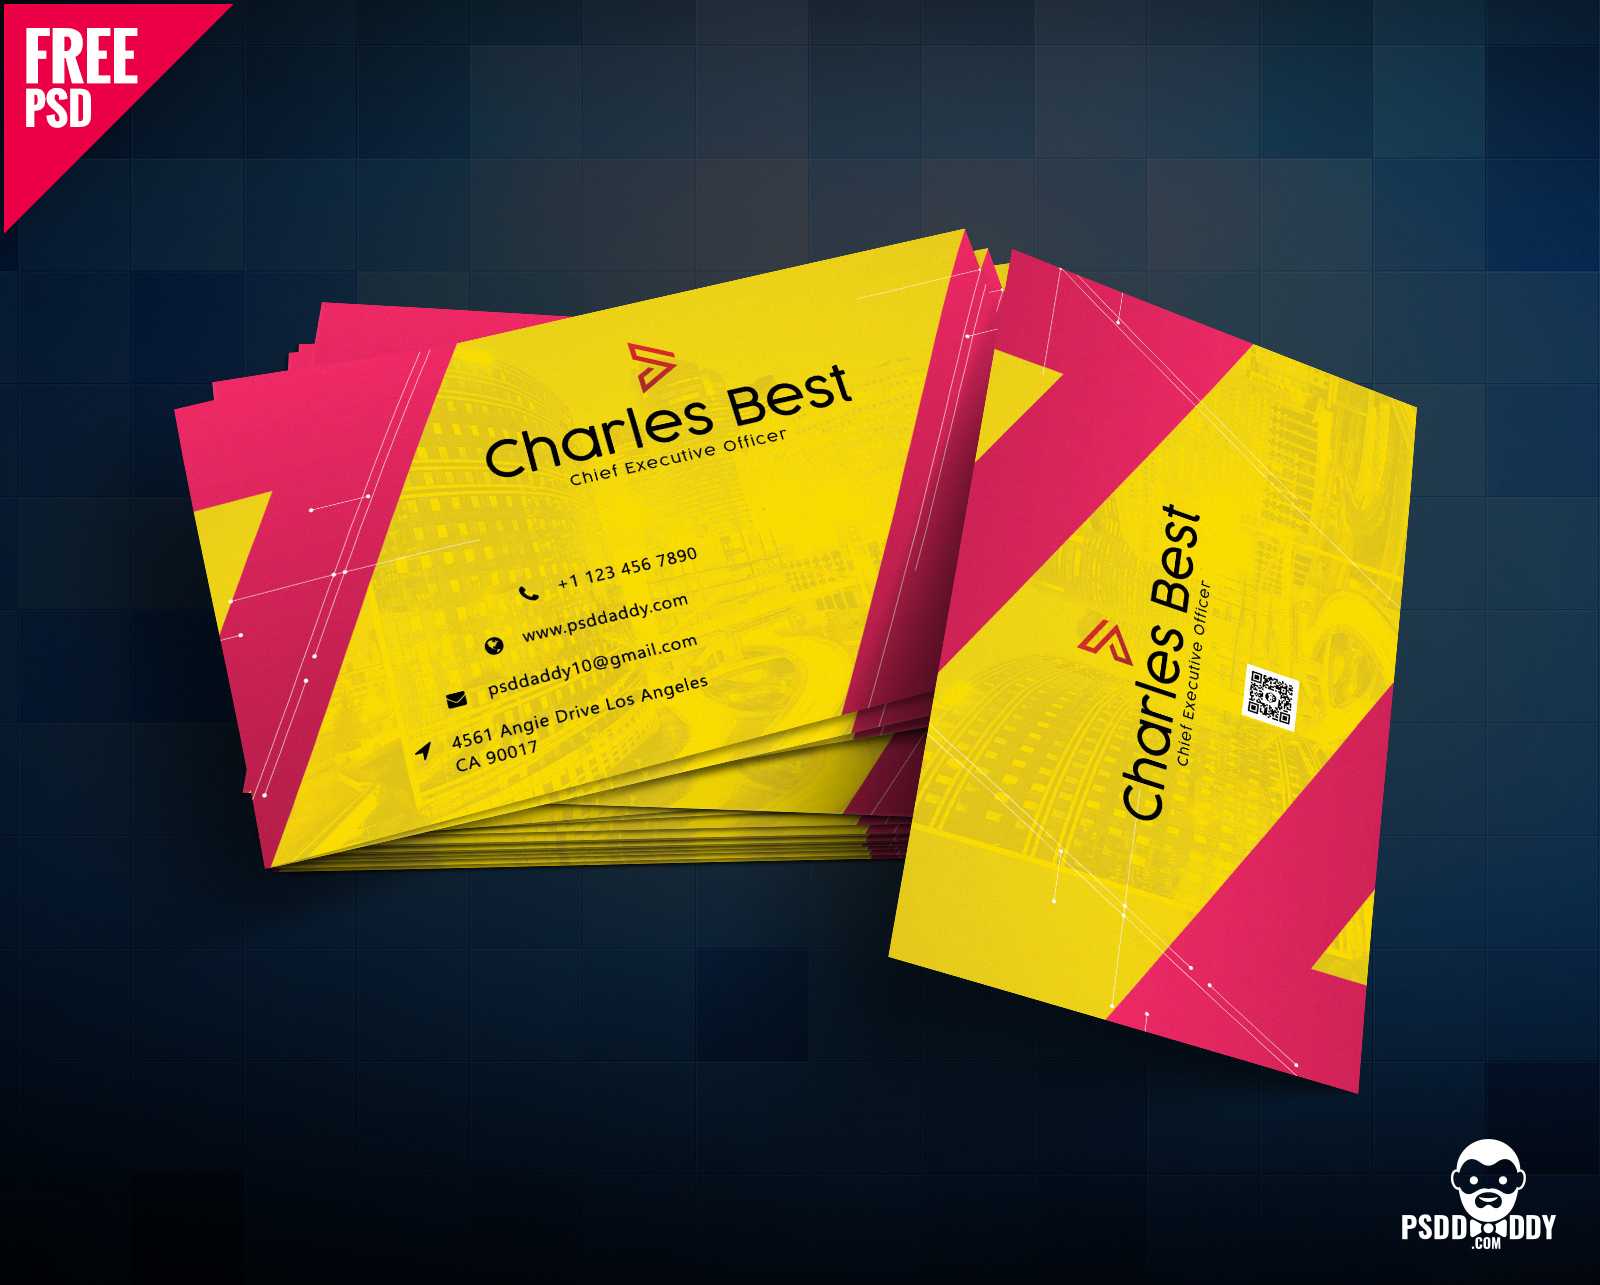 Download] Creative Business Card Free Psd | Psddaddy In Photoshop Business Card Template With Bleed